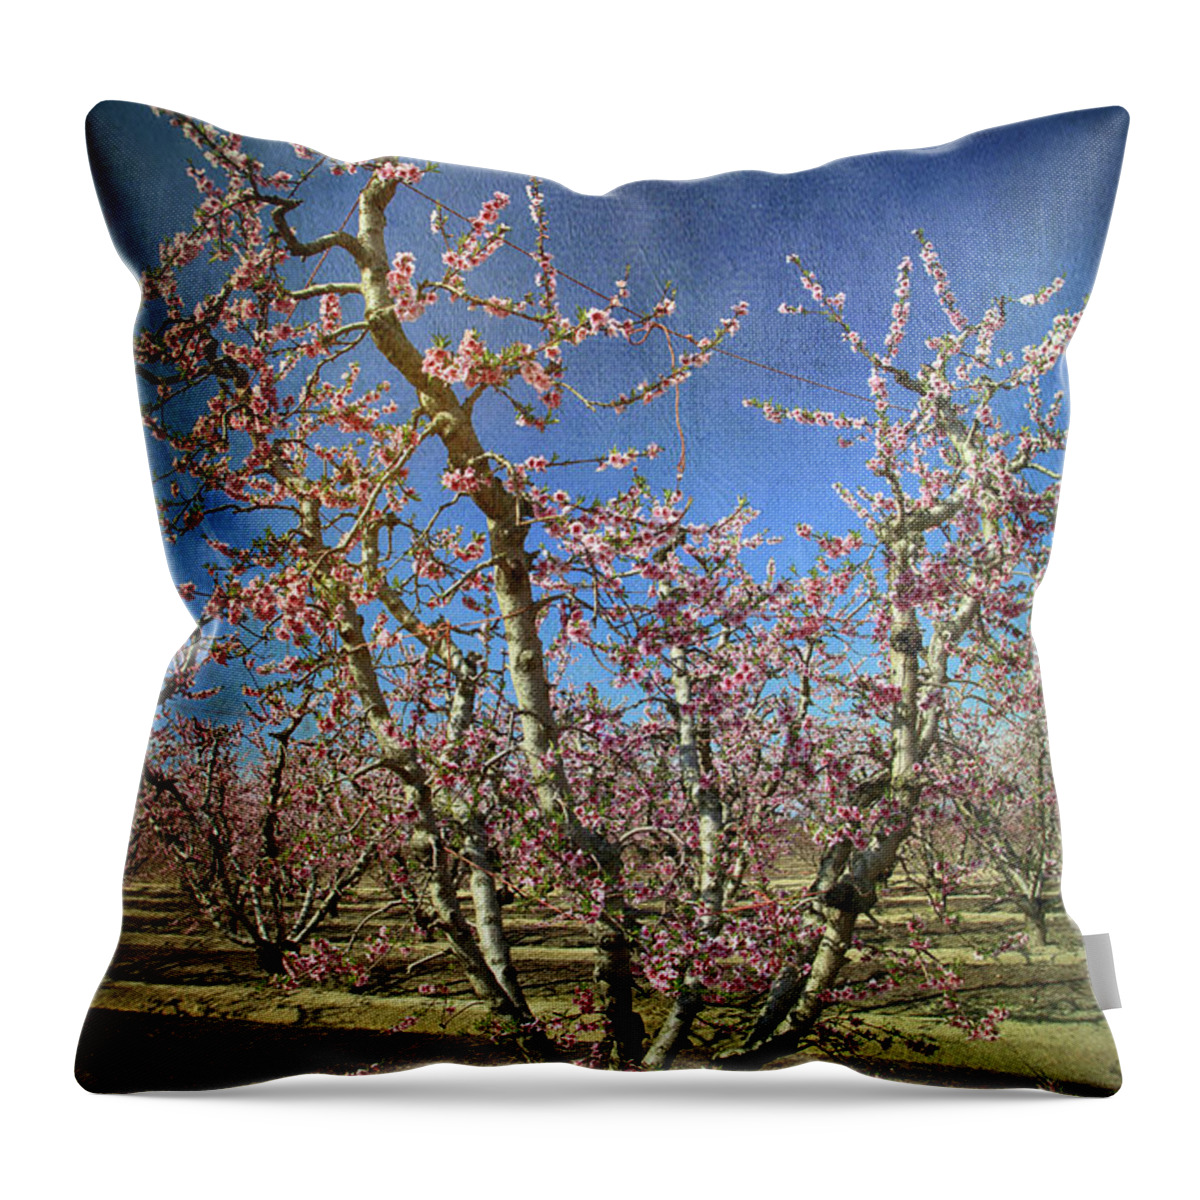 Fresno Blossom Trail Throw Pillow featuring the photograph All Good Things by Laurie Search